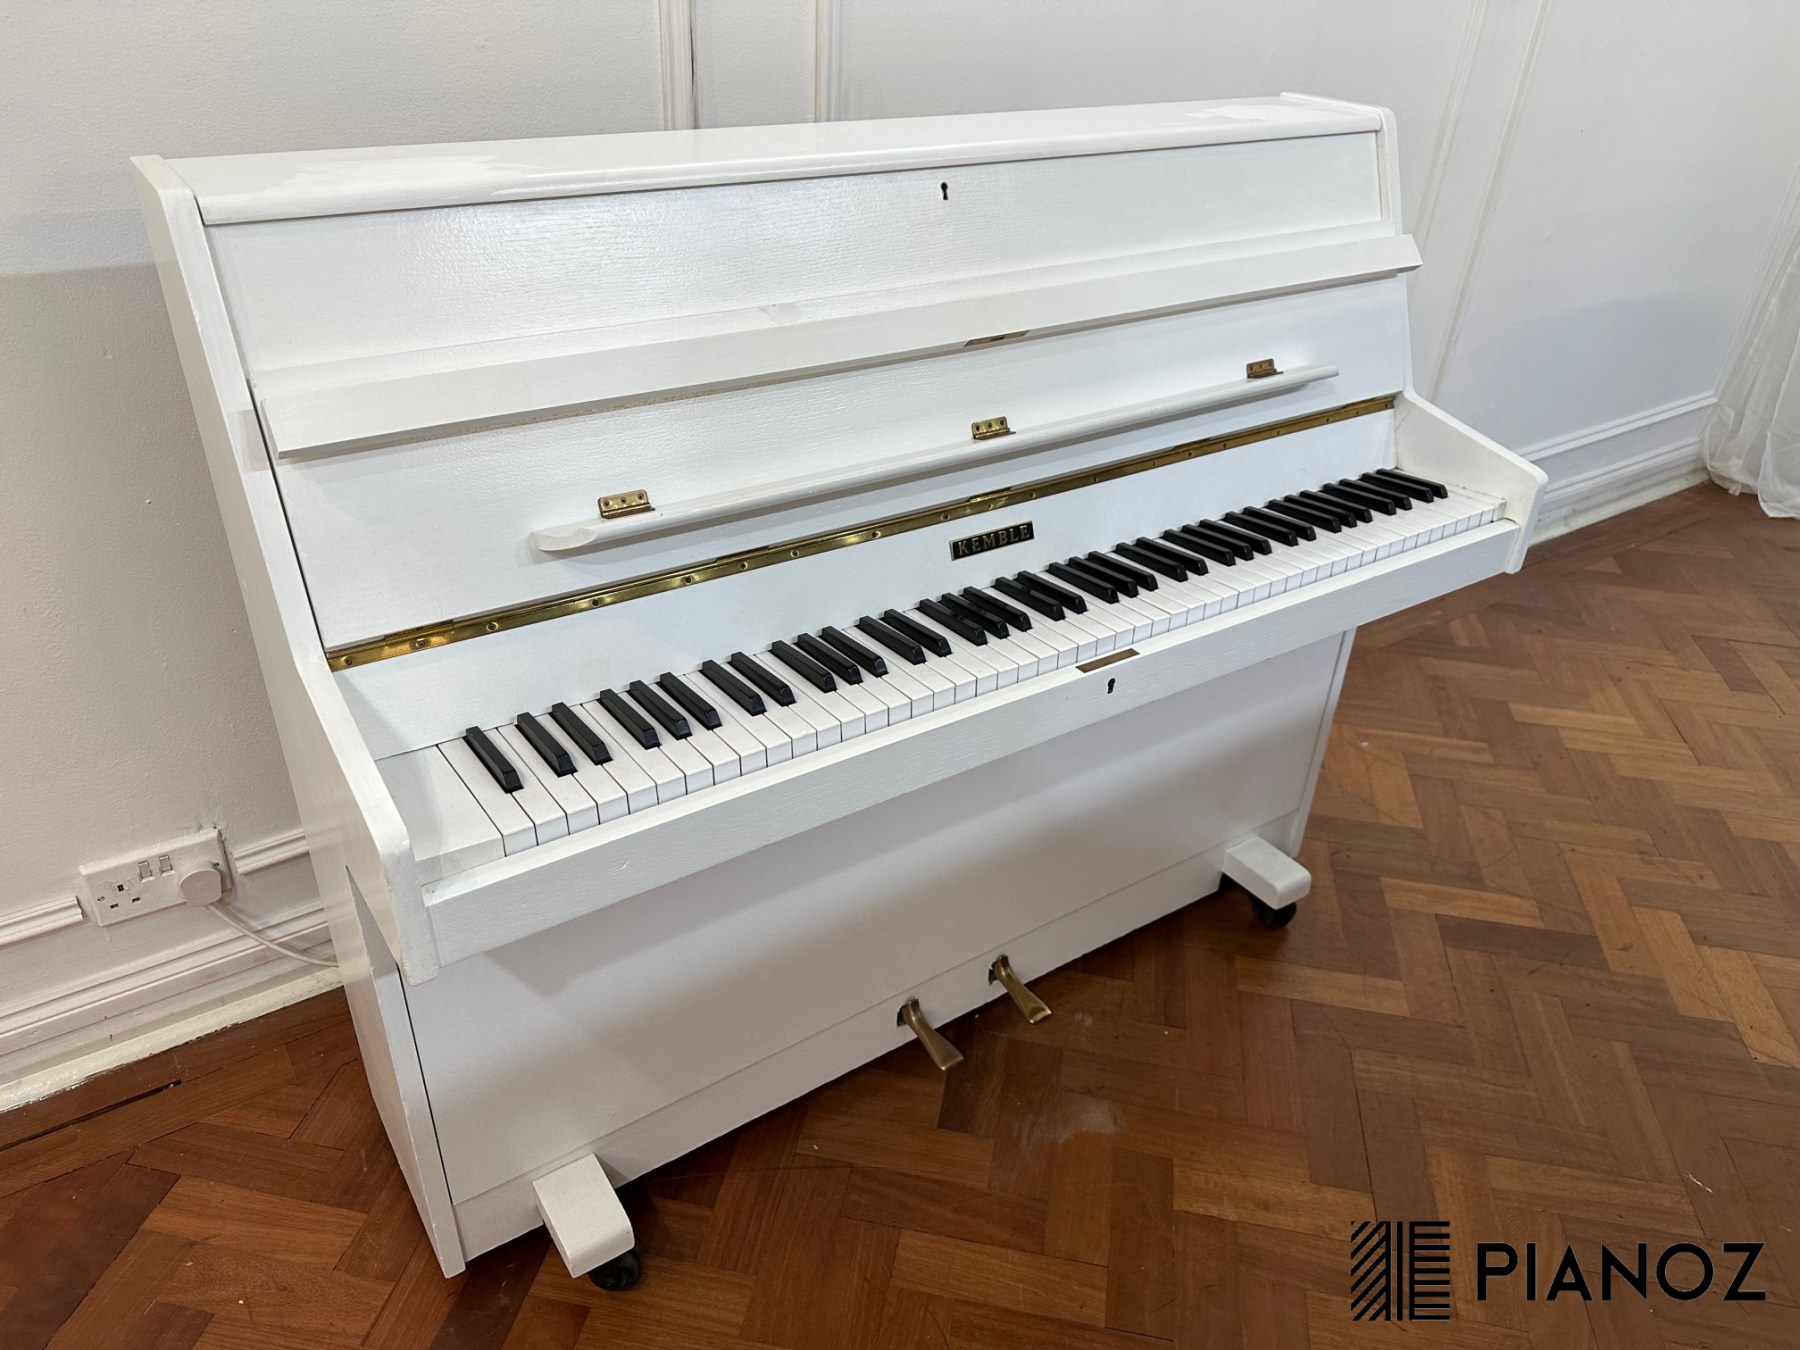 Kemble White Compact Upright Piano piano for sale in UK